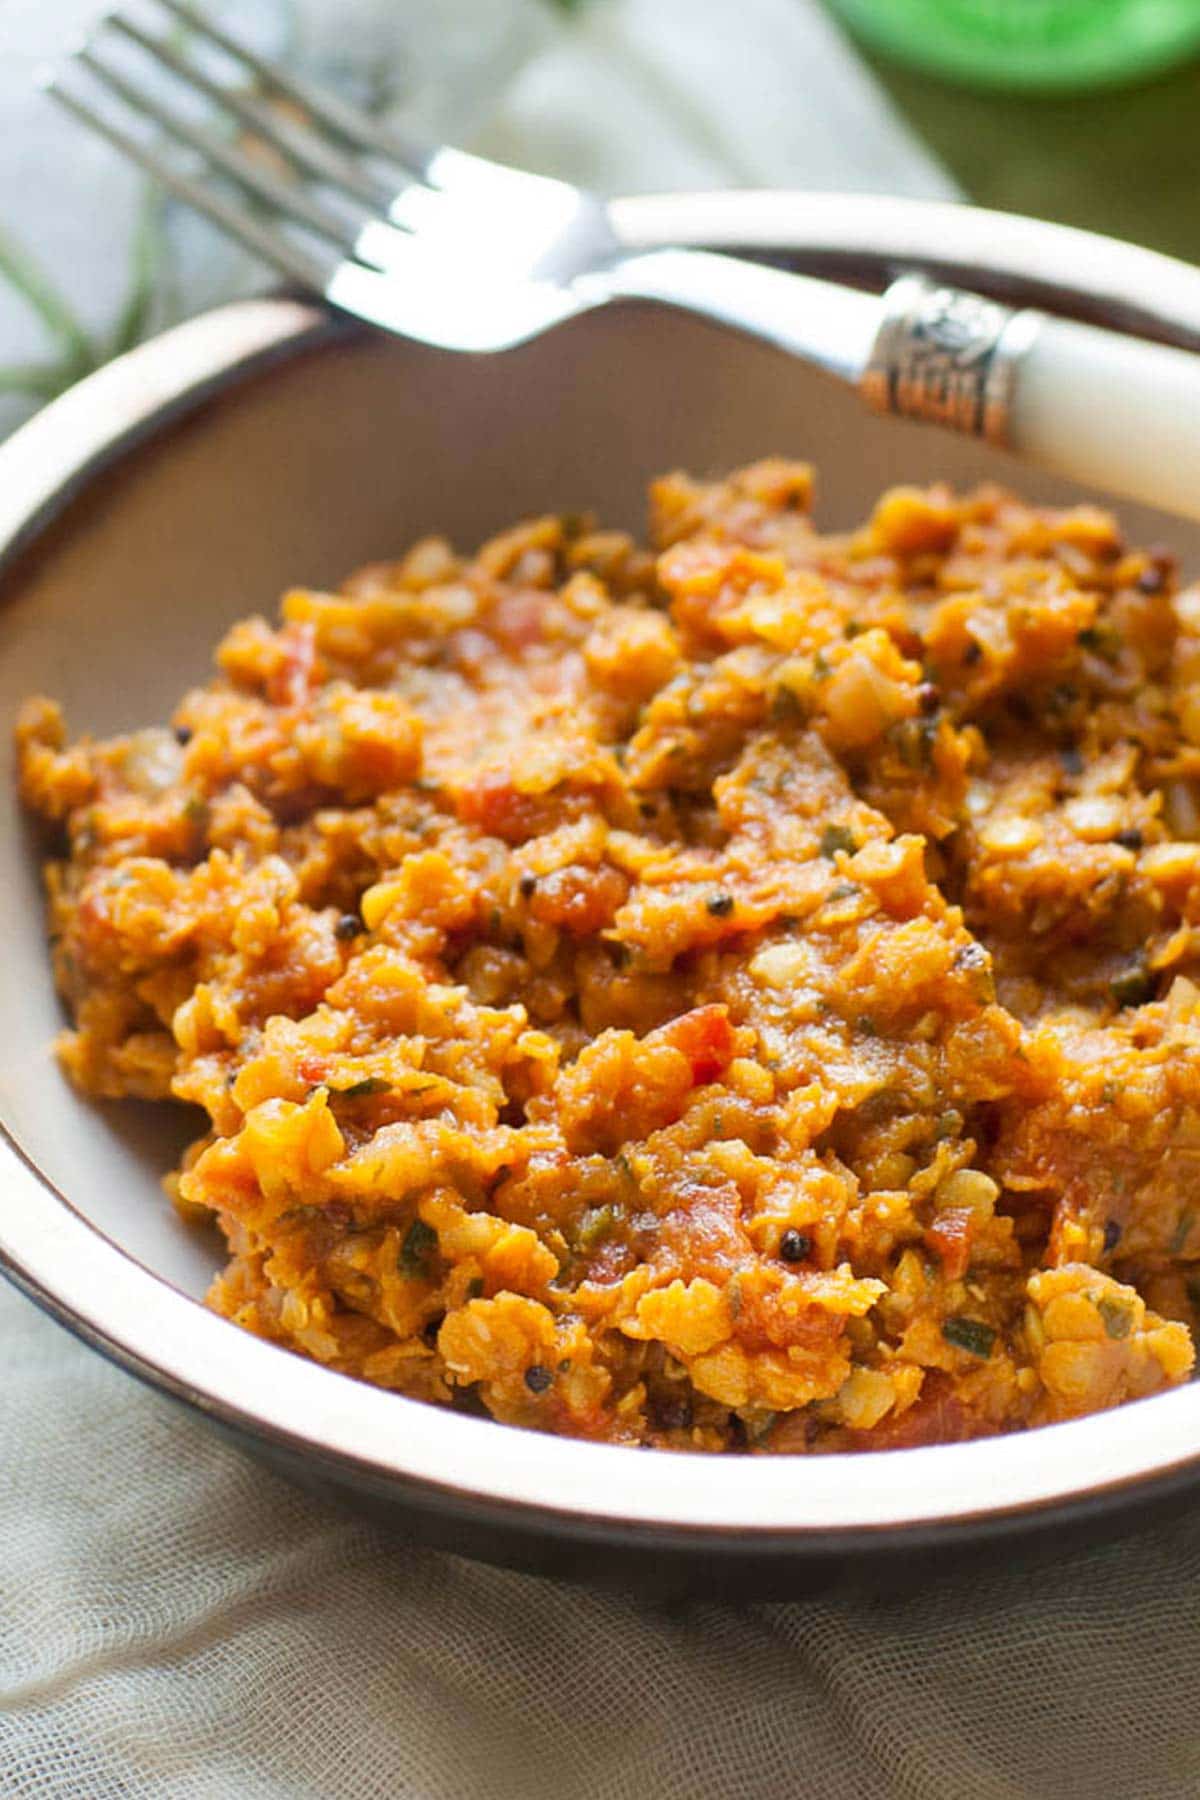 Cooked red lentils in a bowl